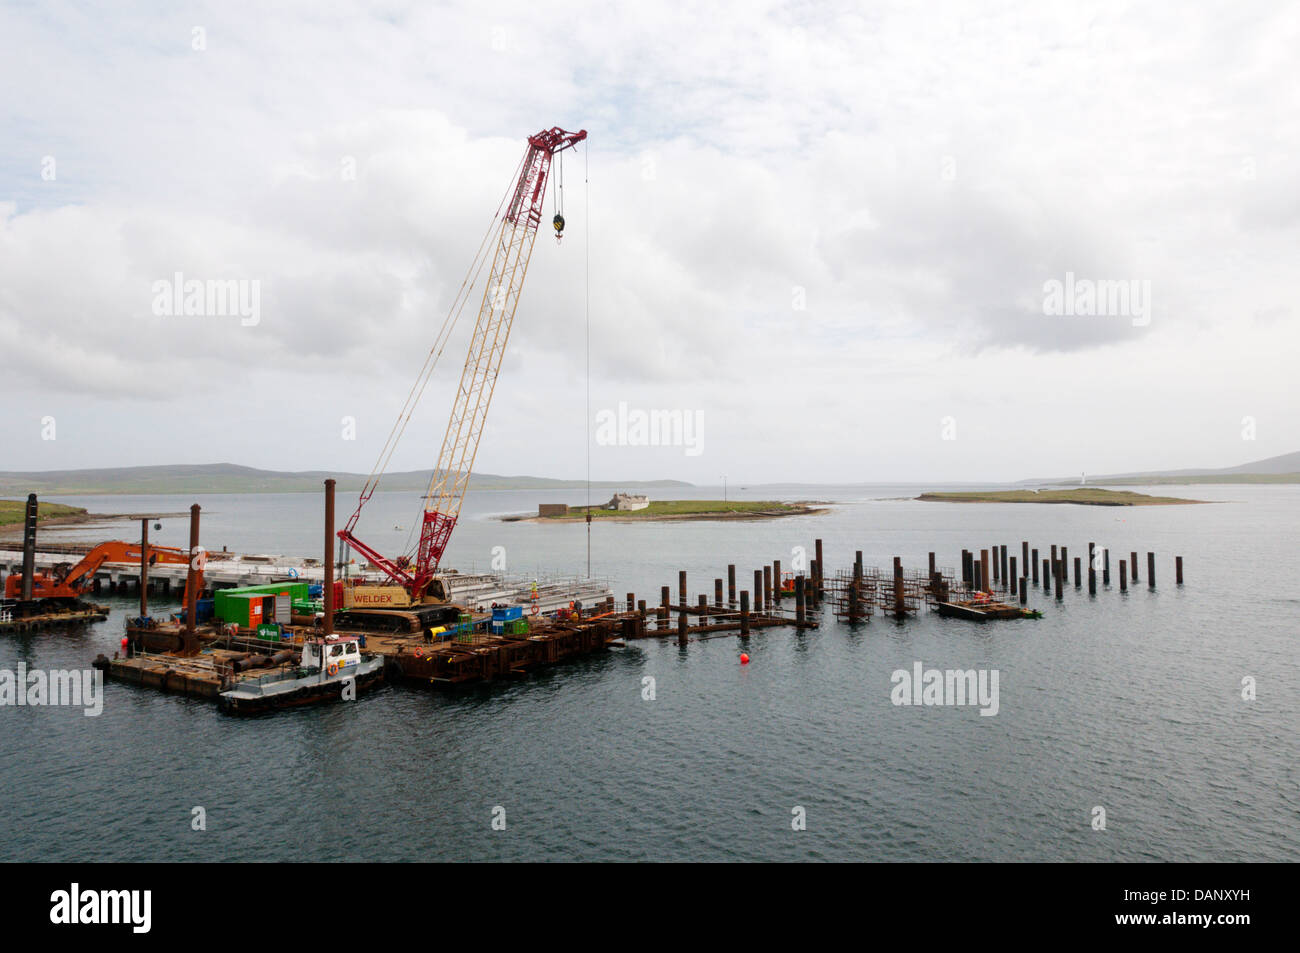 Development of a new pier at Copland's Dock, Sromness, Orkney. Stock Photo